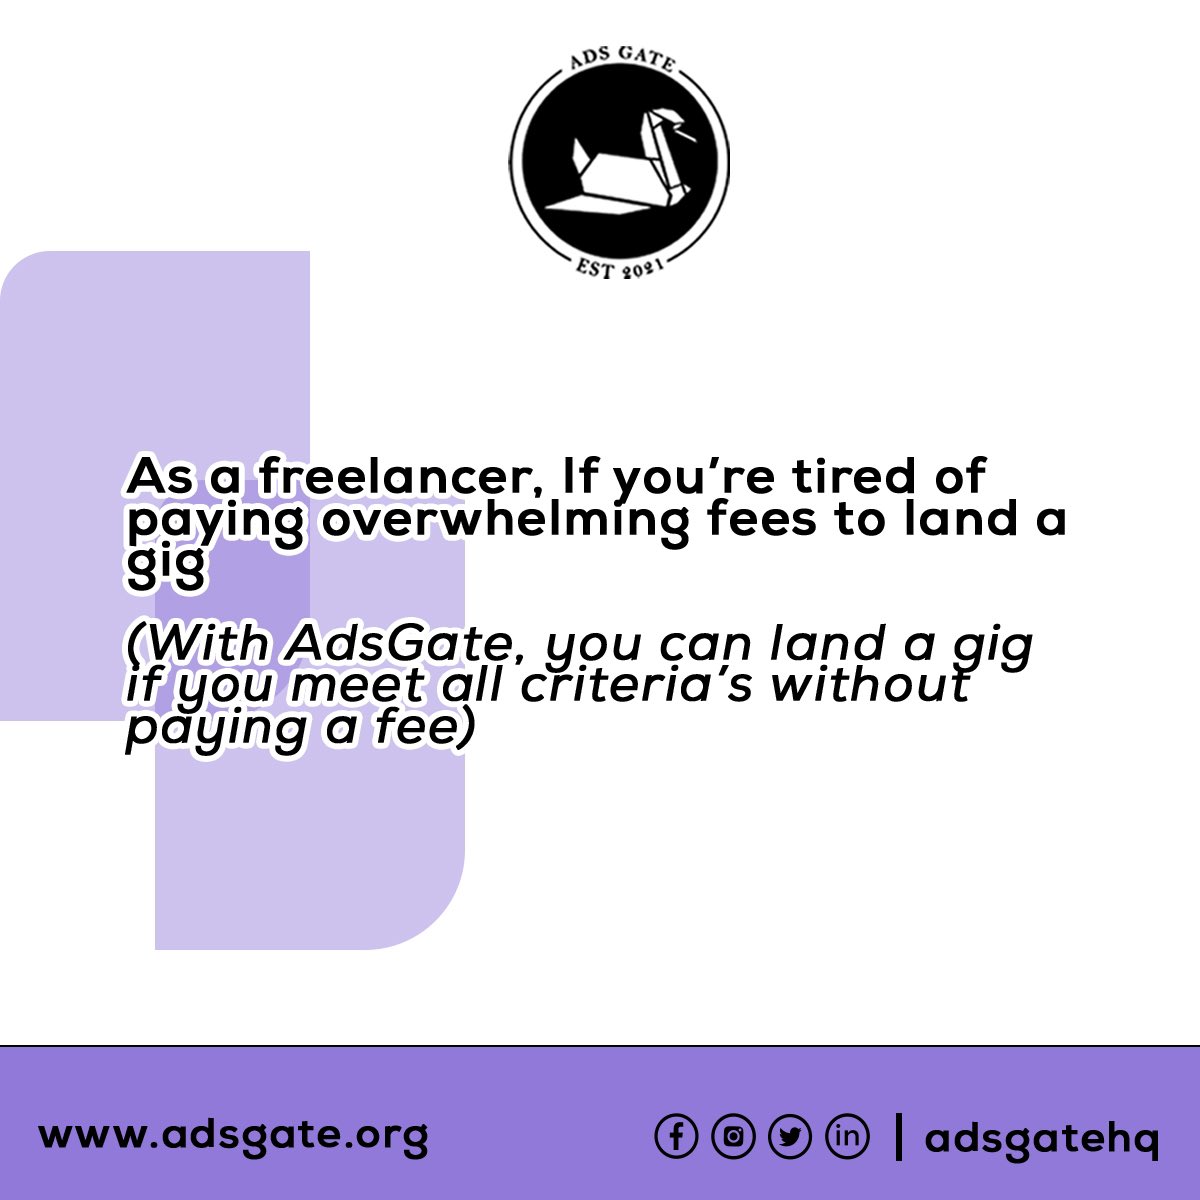 Every business owner / Freelancer operating in the continent (Africa) has had to face one of the above listed challenges which can be avoided.

Work with us today, Make AdsGate your gateway to success!!

#remotejobs #gigeconomy